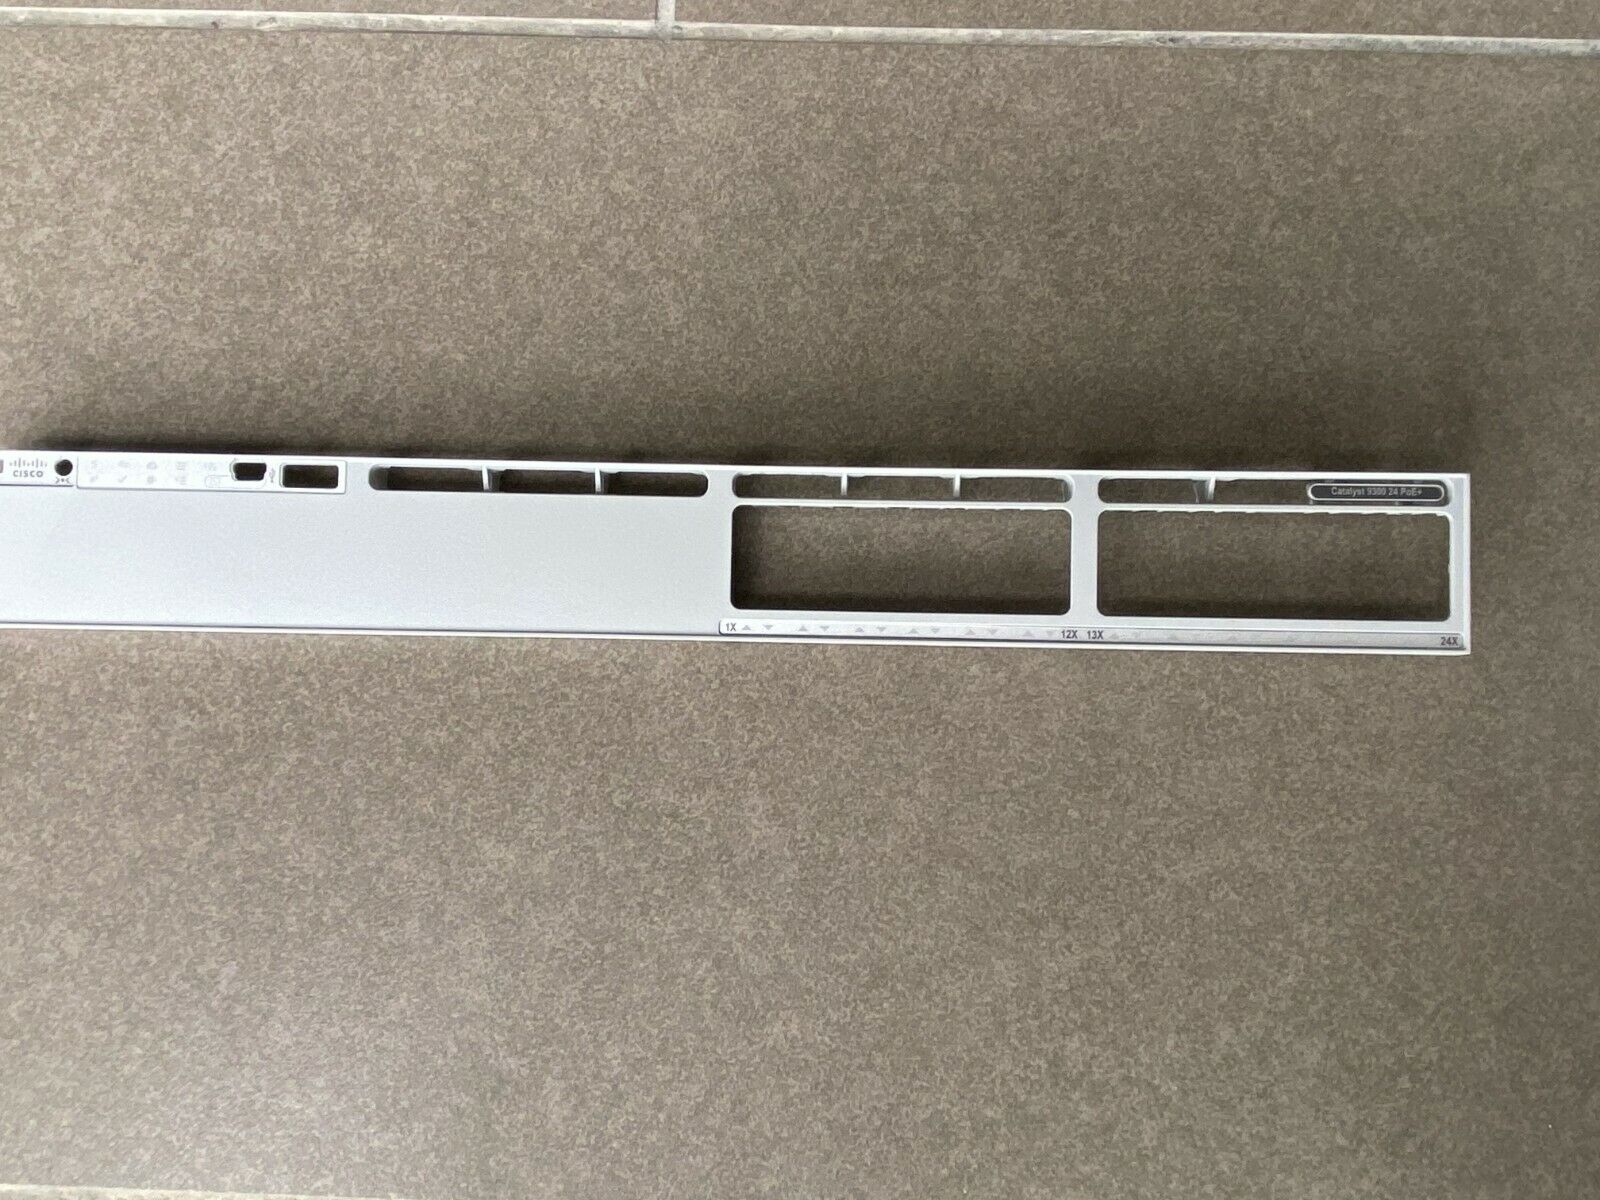 Cisco Catalyst C9300-24P-E C9300-24P-A Faceplate for Replacement 